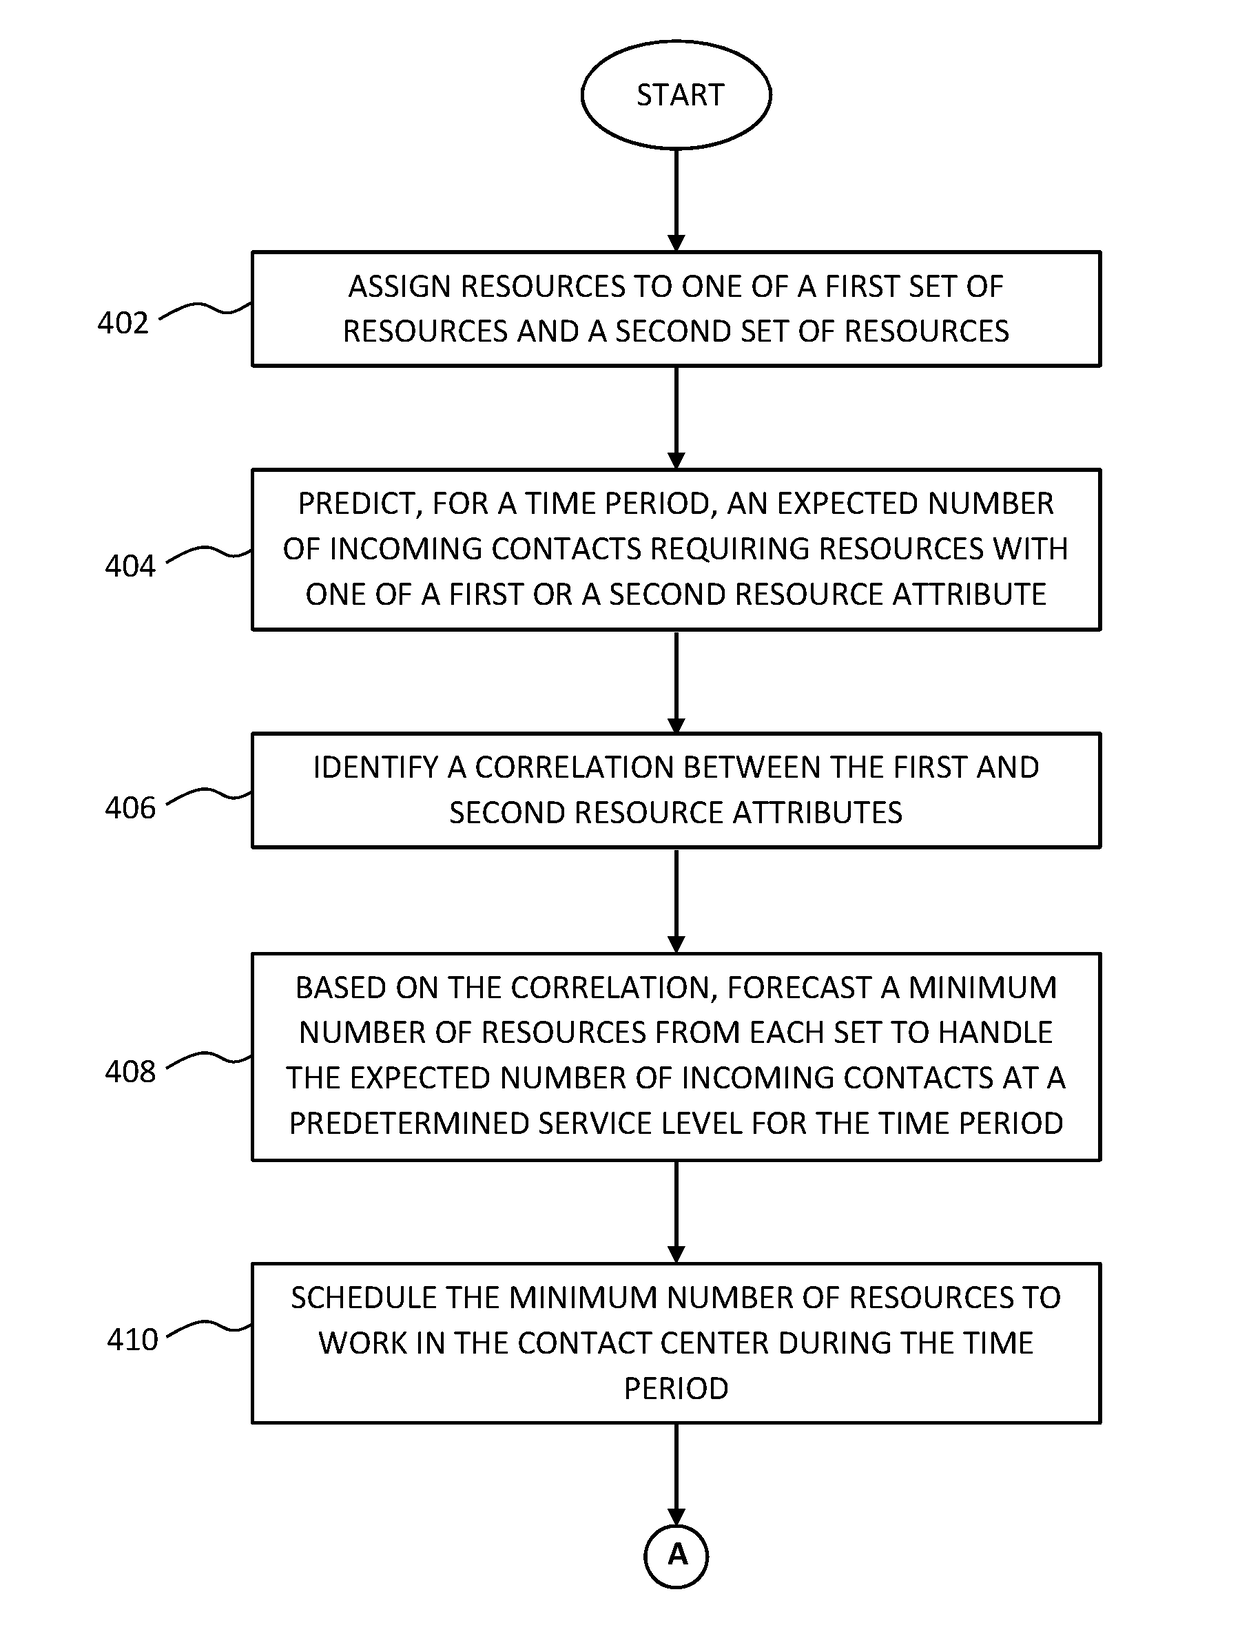 Systems and methods for optimal scheduling of resources in a contact center